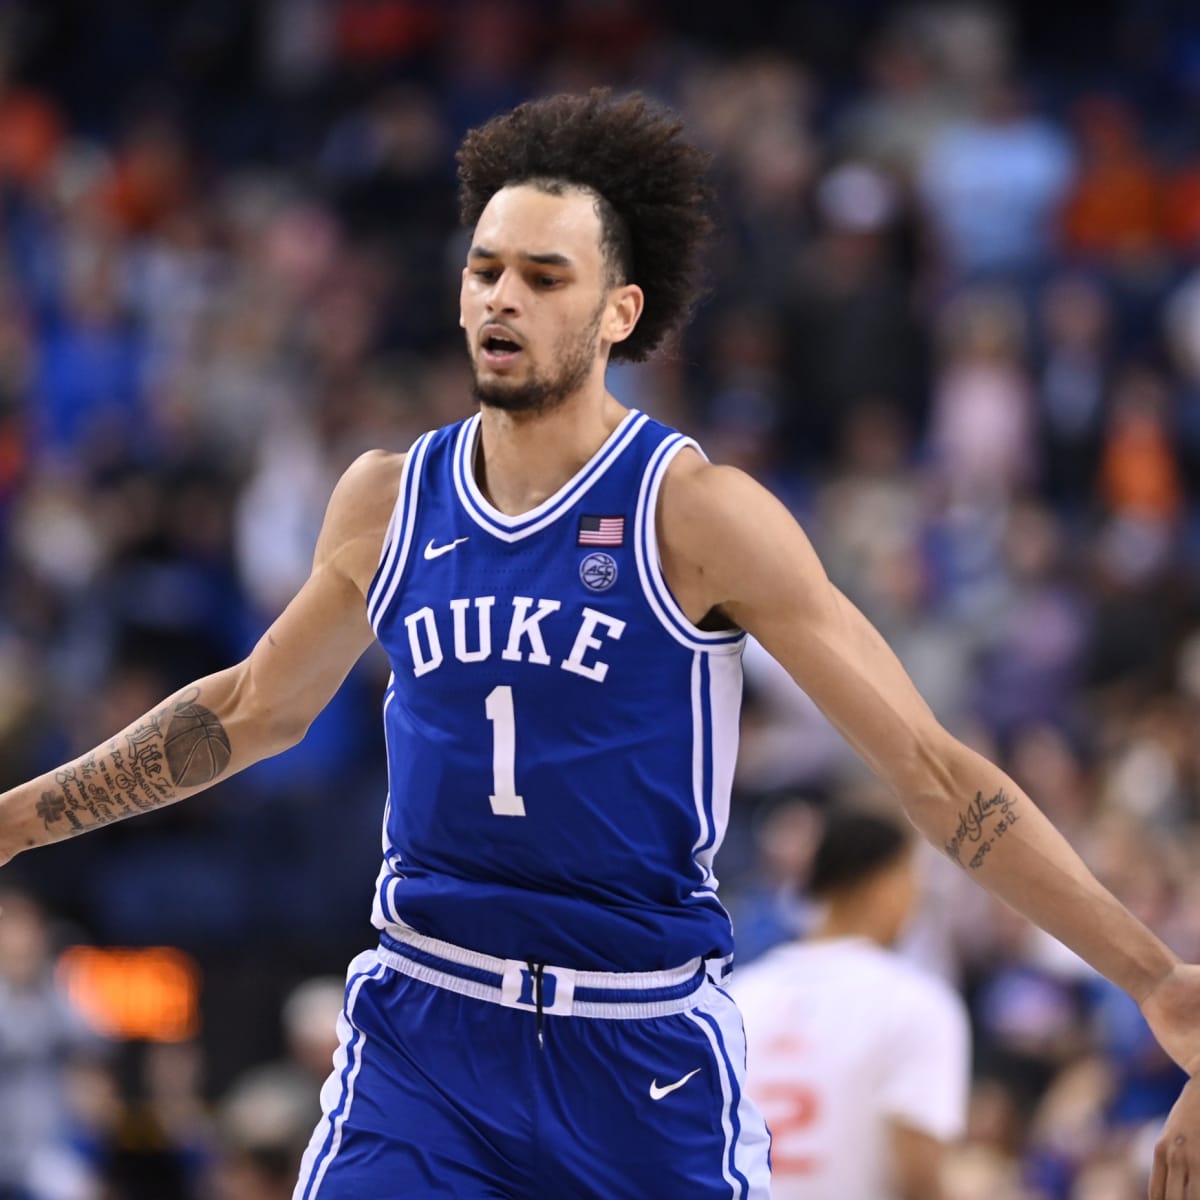 Dates to know for the 2023 NBA Draft and a possible Mavericks